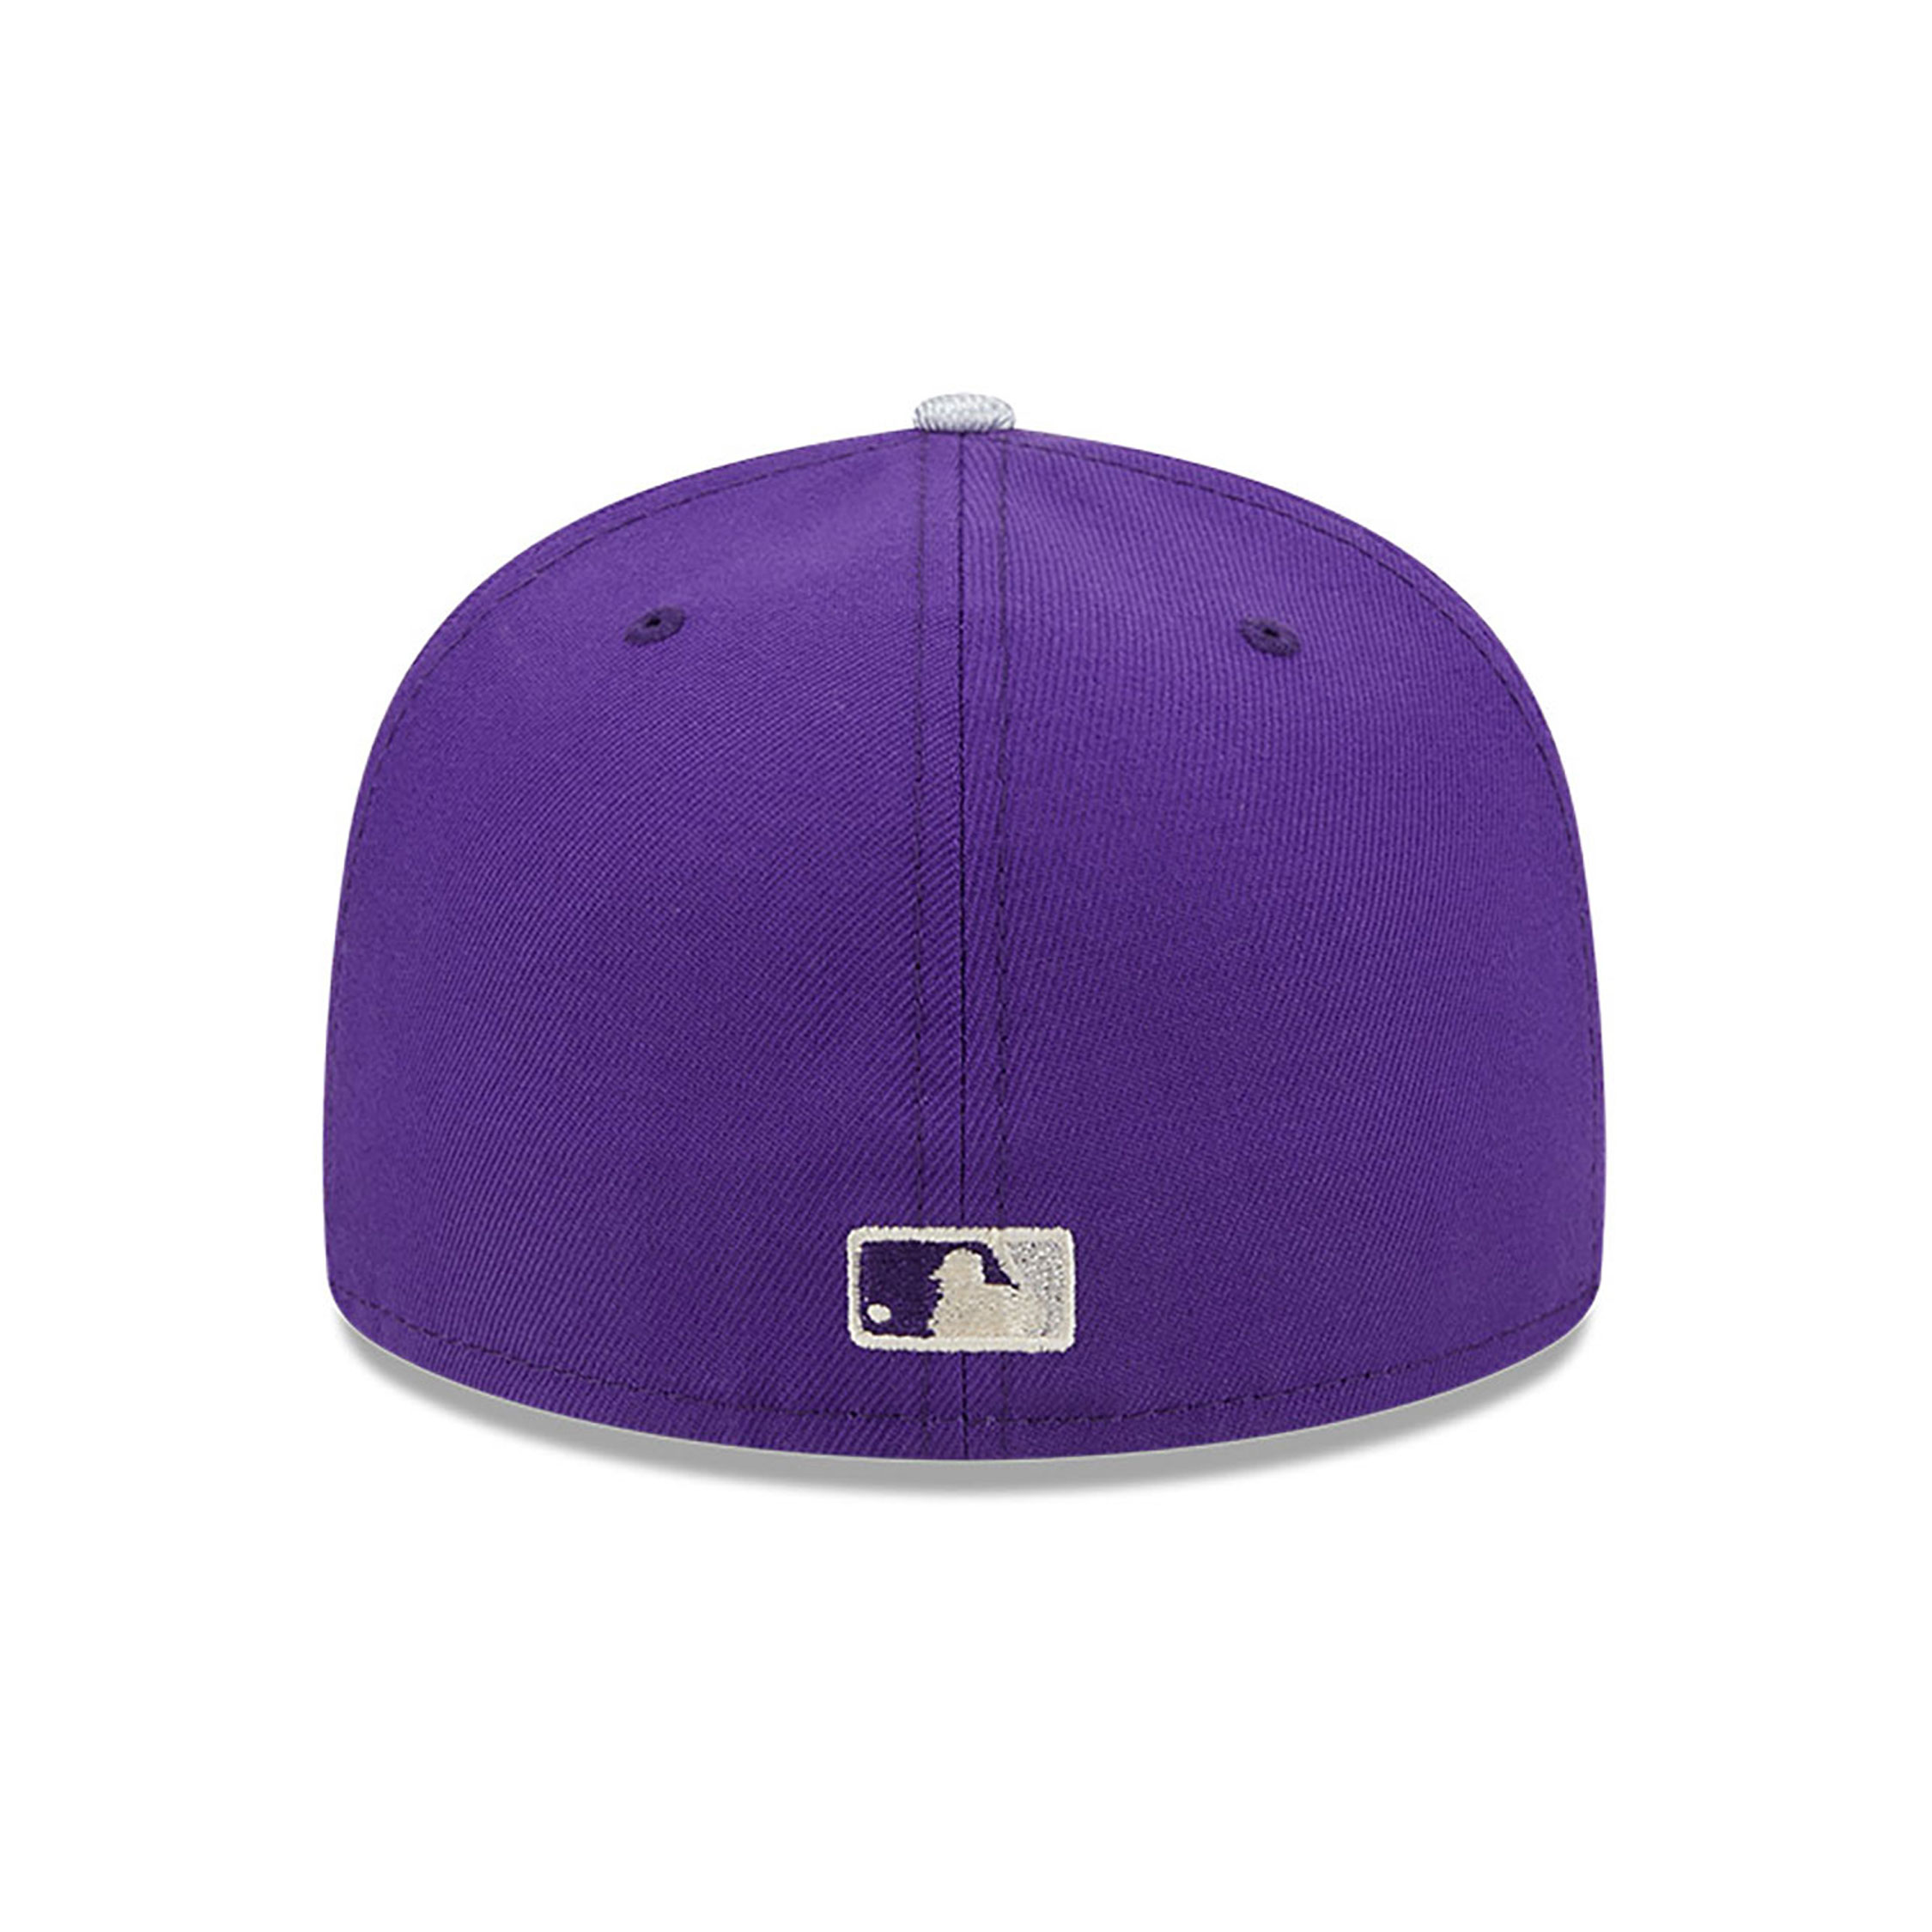 Colorado Rockies Team Shimmer Purple 59FIFTY Fitted Cap